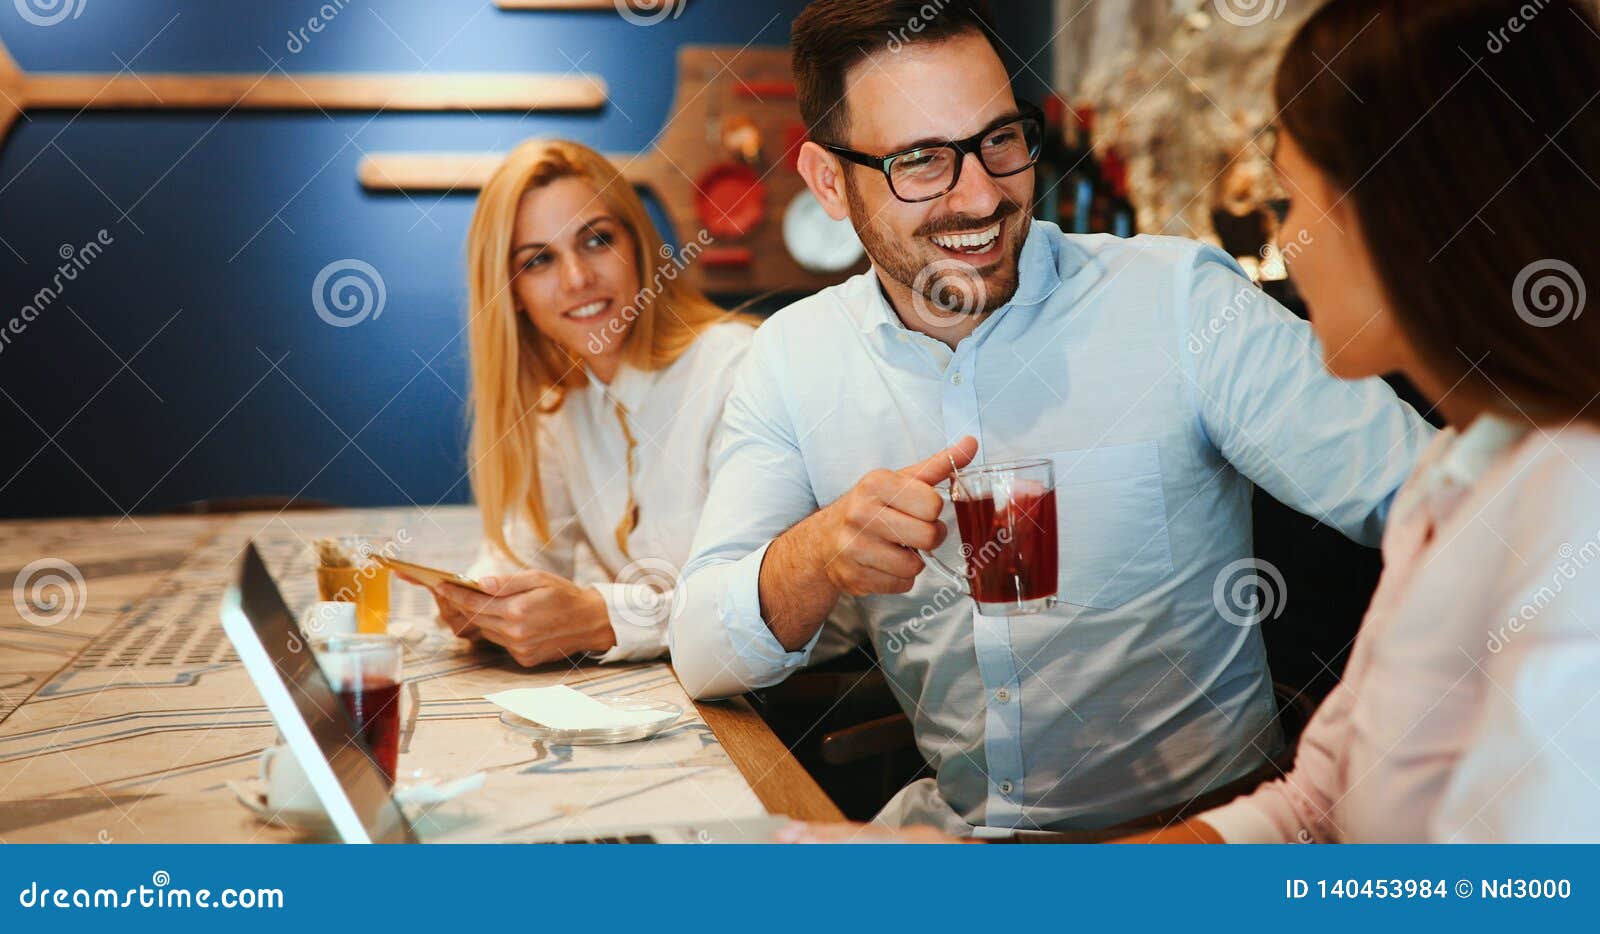 happy colleagues from work socializing in restaurant